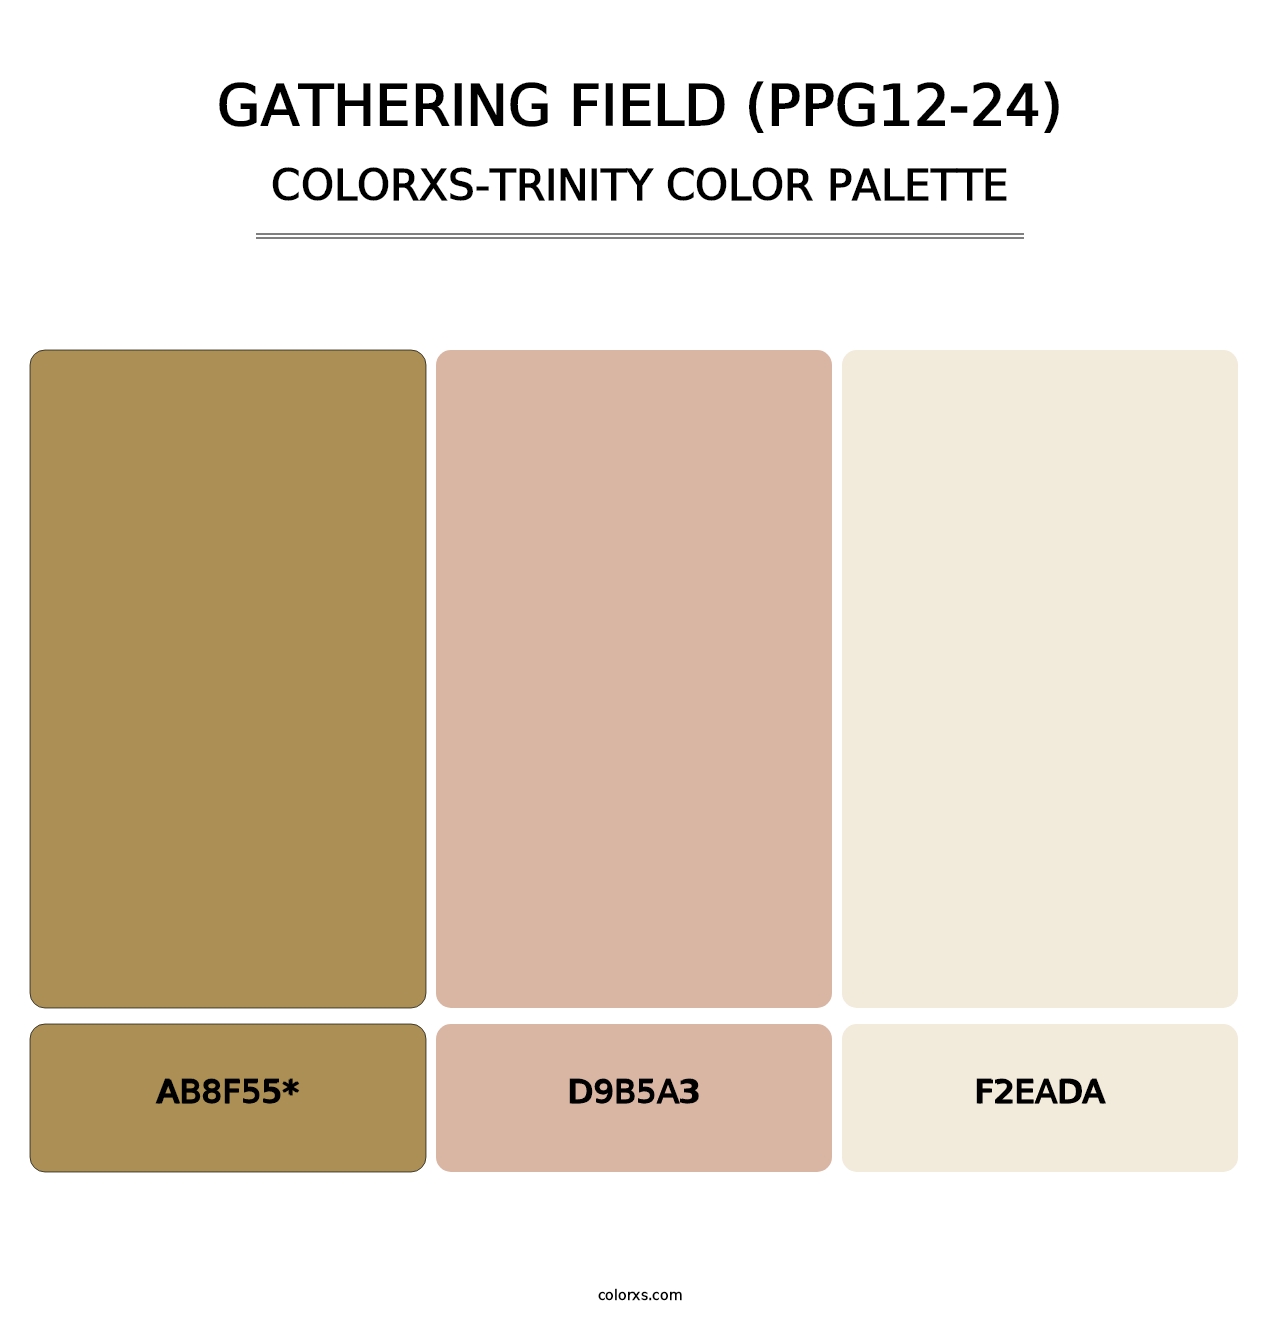 Gathering Field (PPG12-24) - Colorxs Trinity Palette